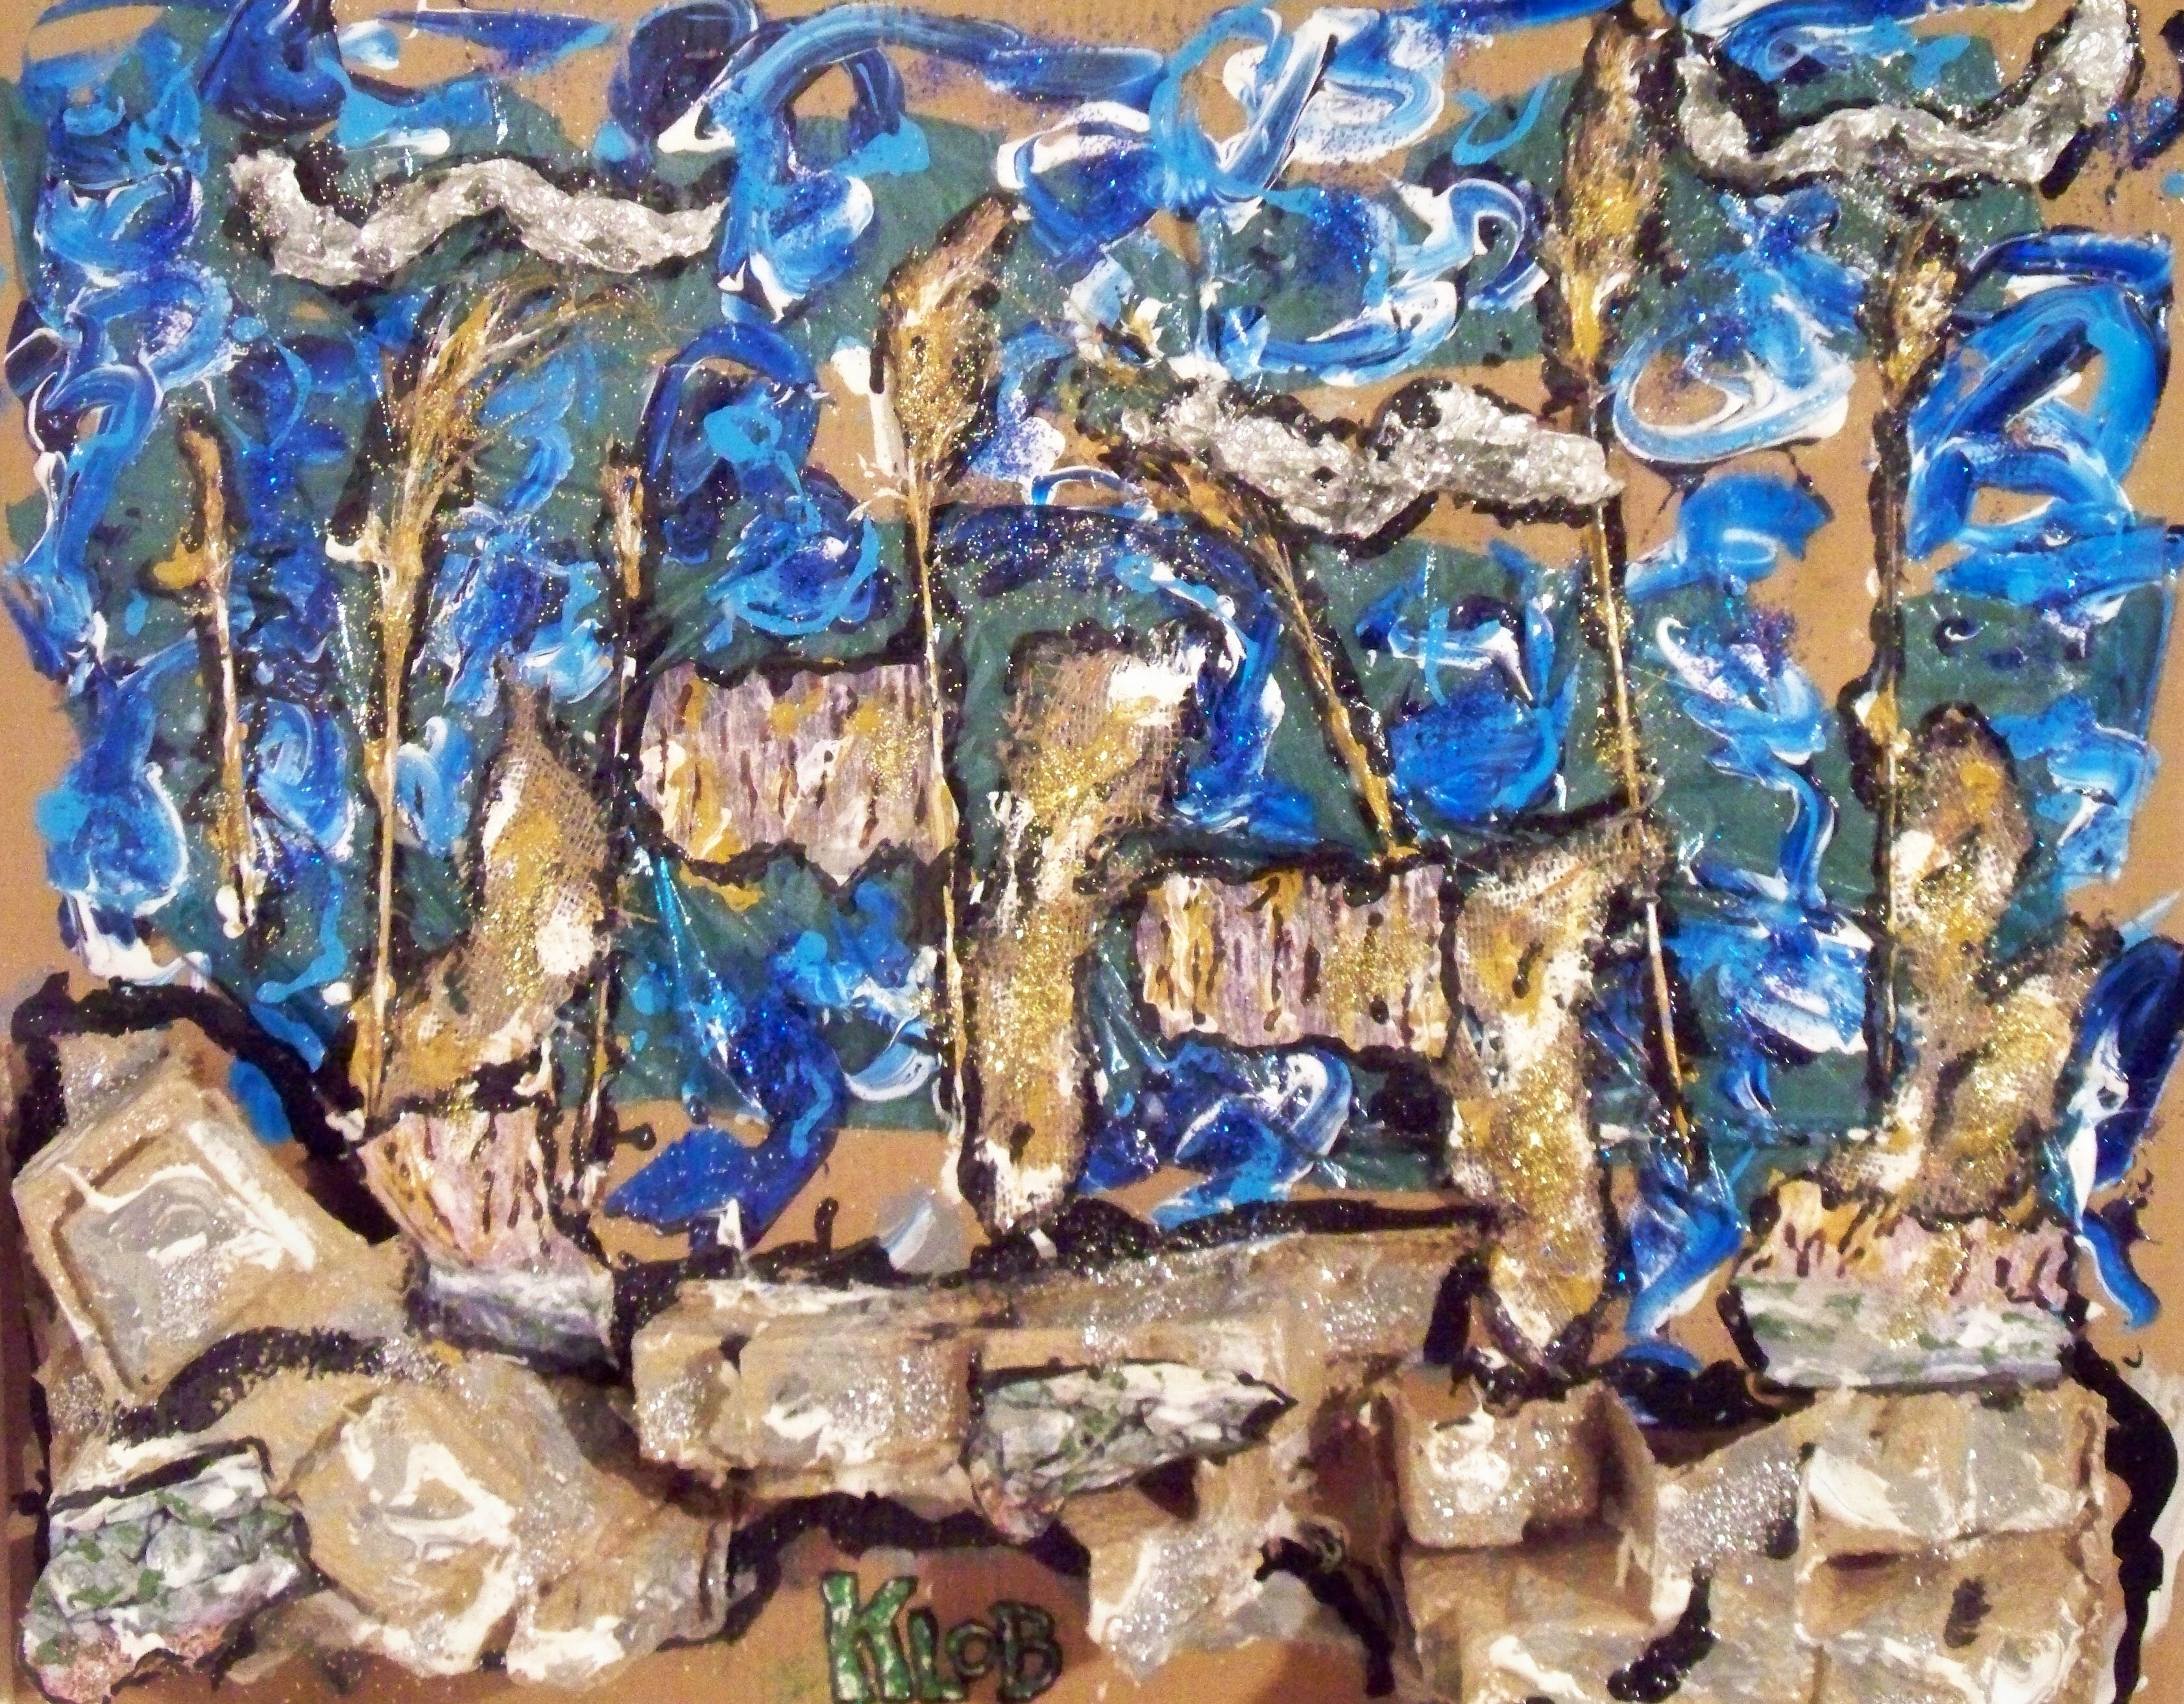 2012; acrylic, sytrofoam, roughly corrugated packing cradborad, photographs with (craypa,ink and paint), blue celophane, aluminum foil, photos of my computer screen; 32 in X 40 in